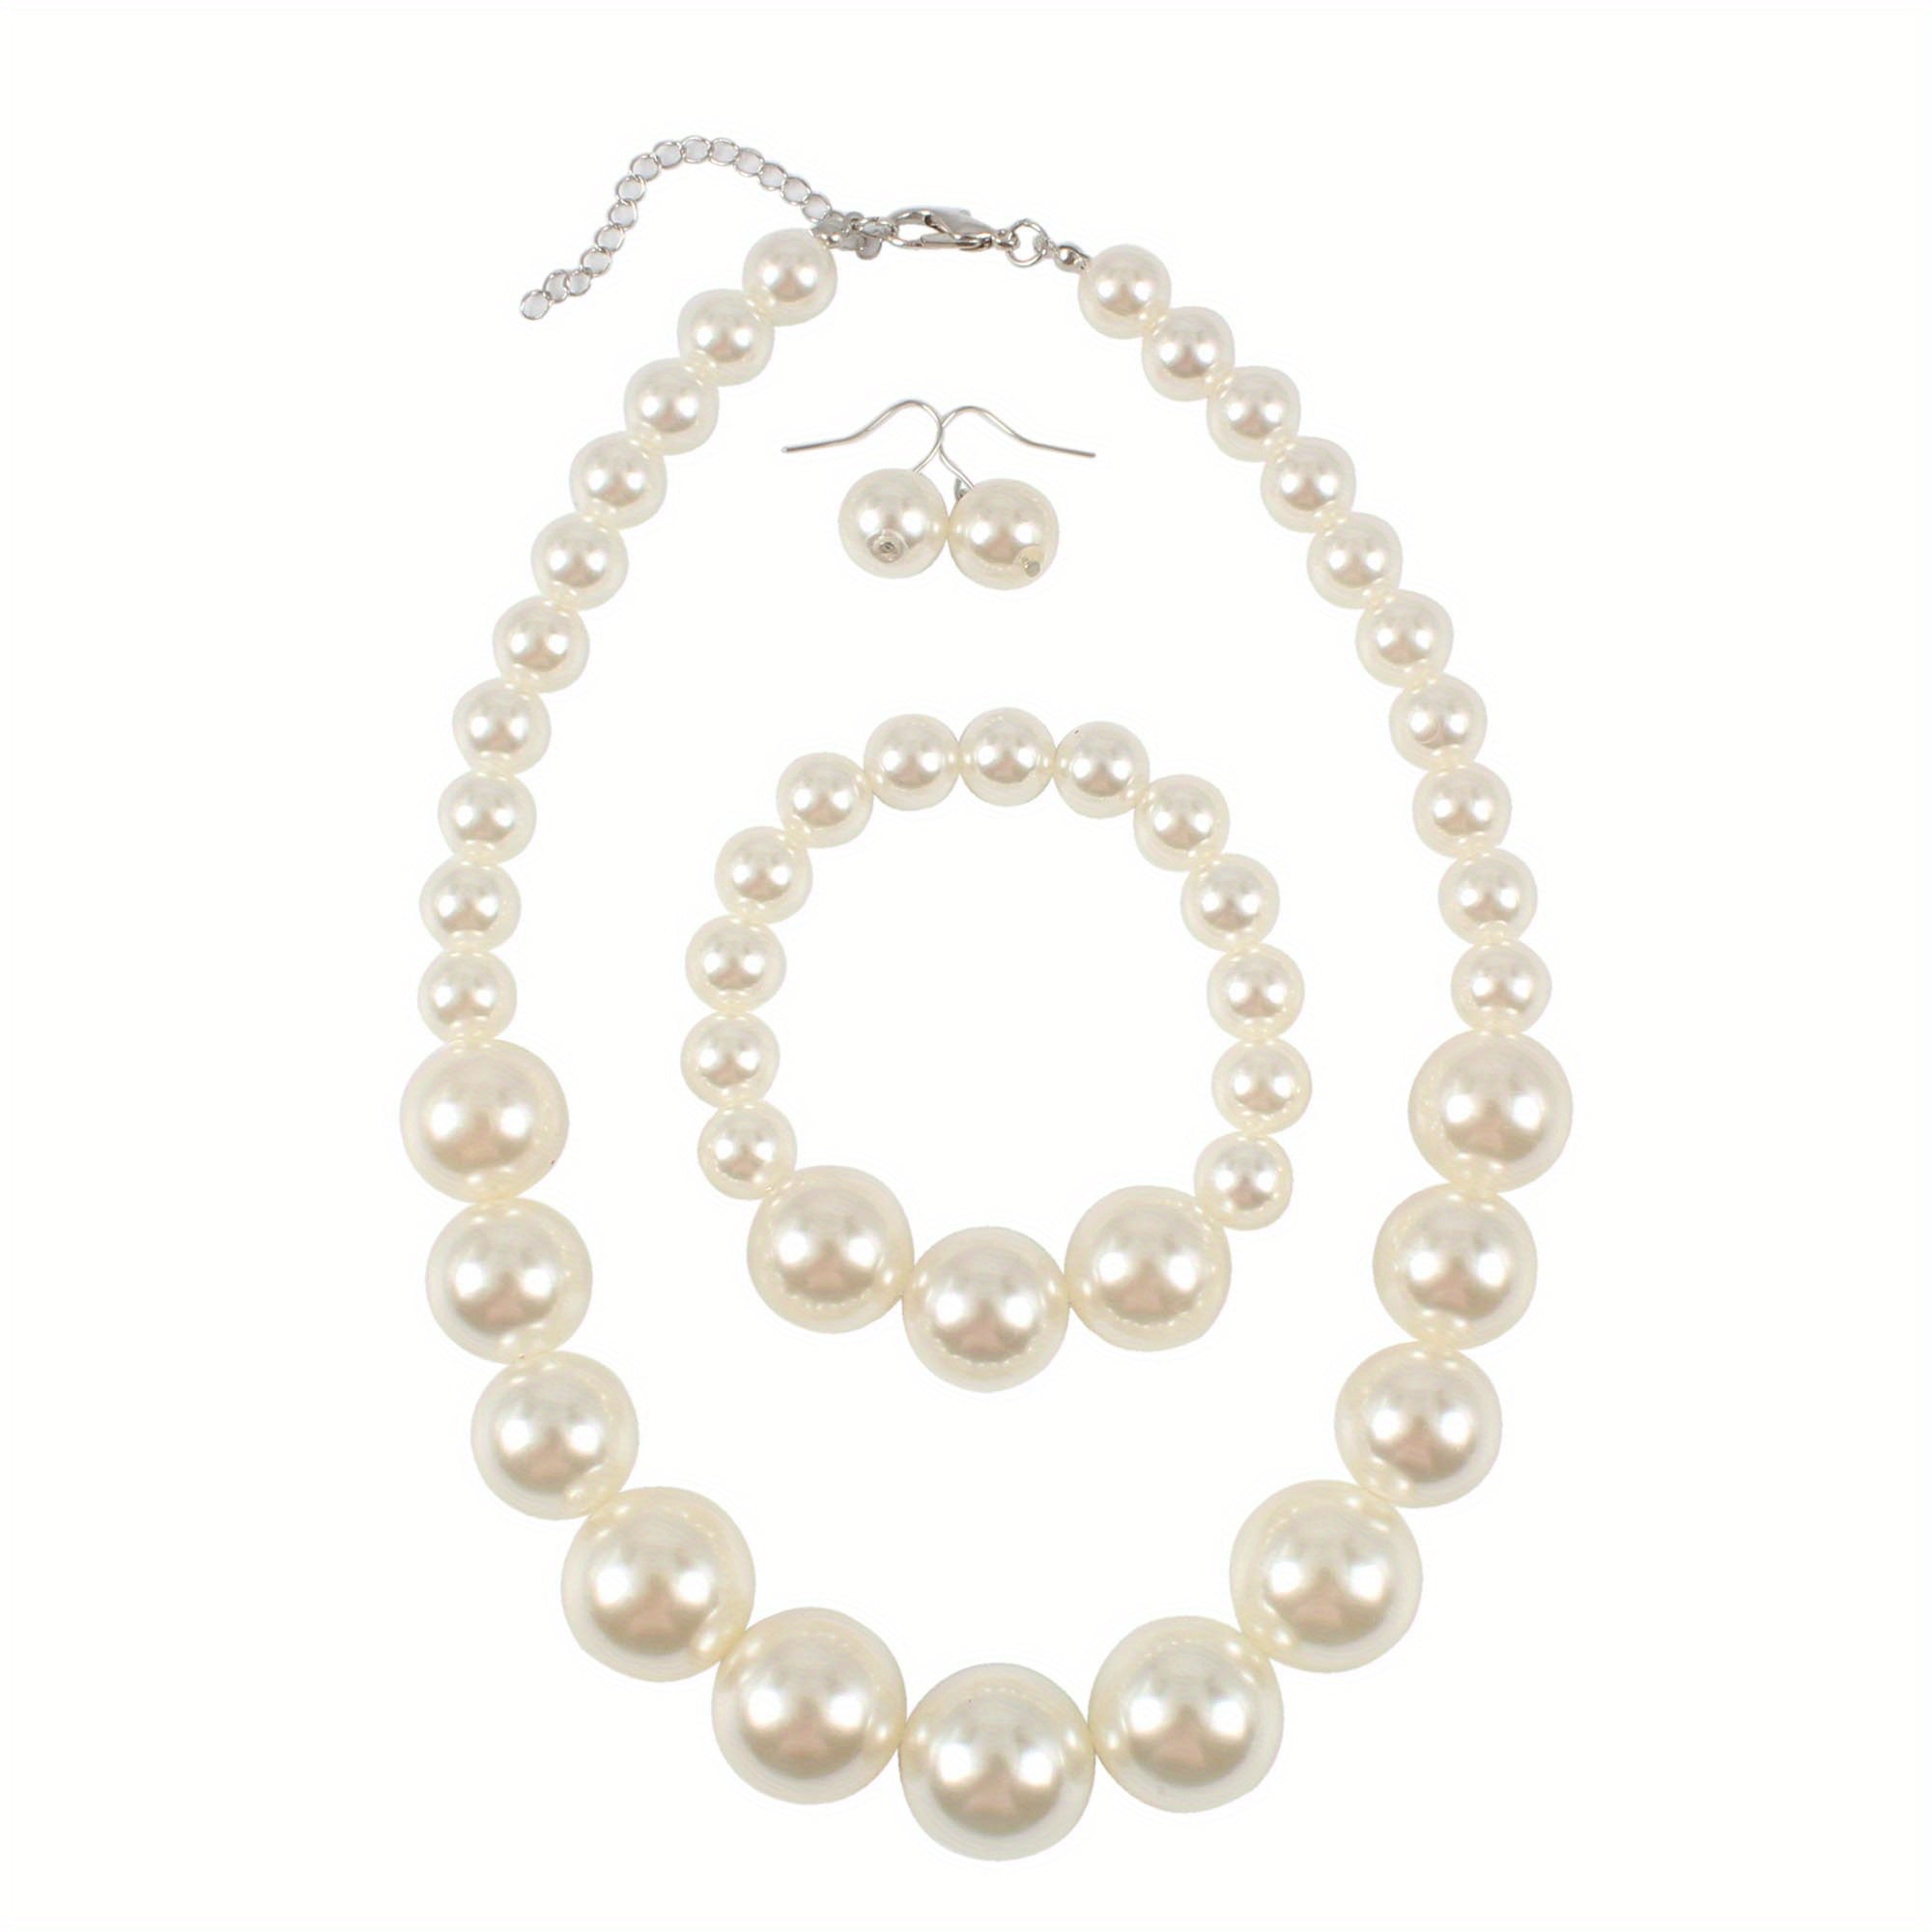 Elegant Faux Pearl Jewelry Set for Women - Perfect Gift for Any Occasion